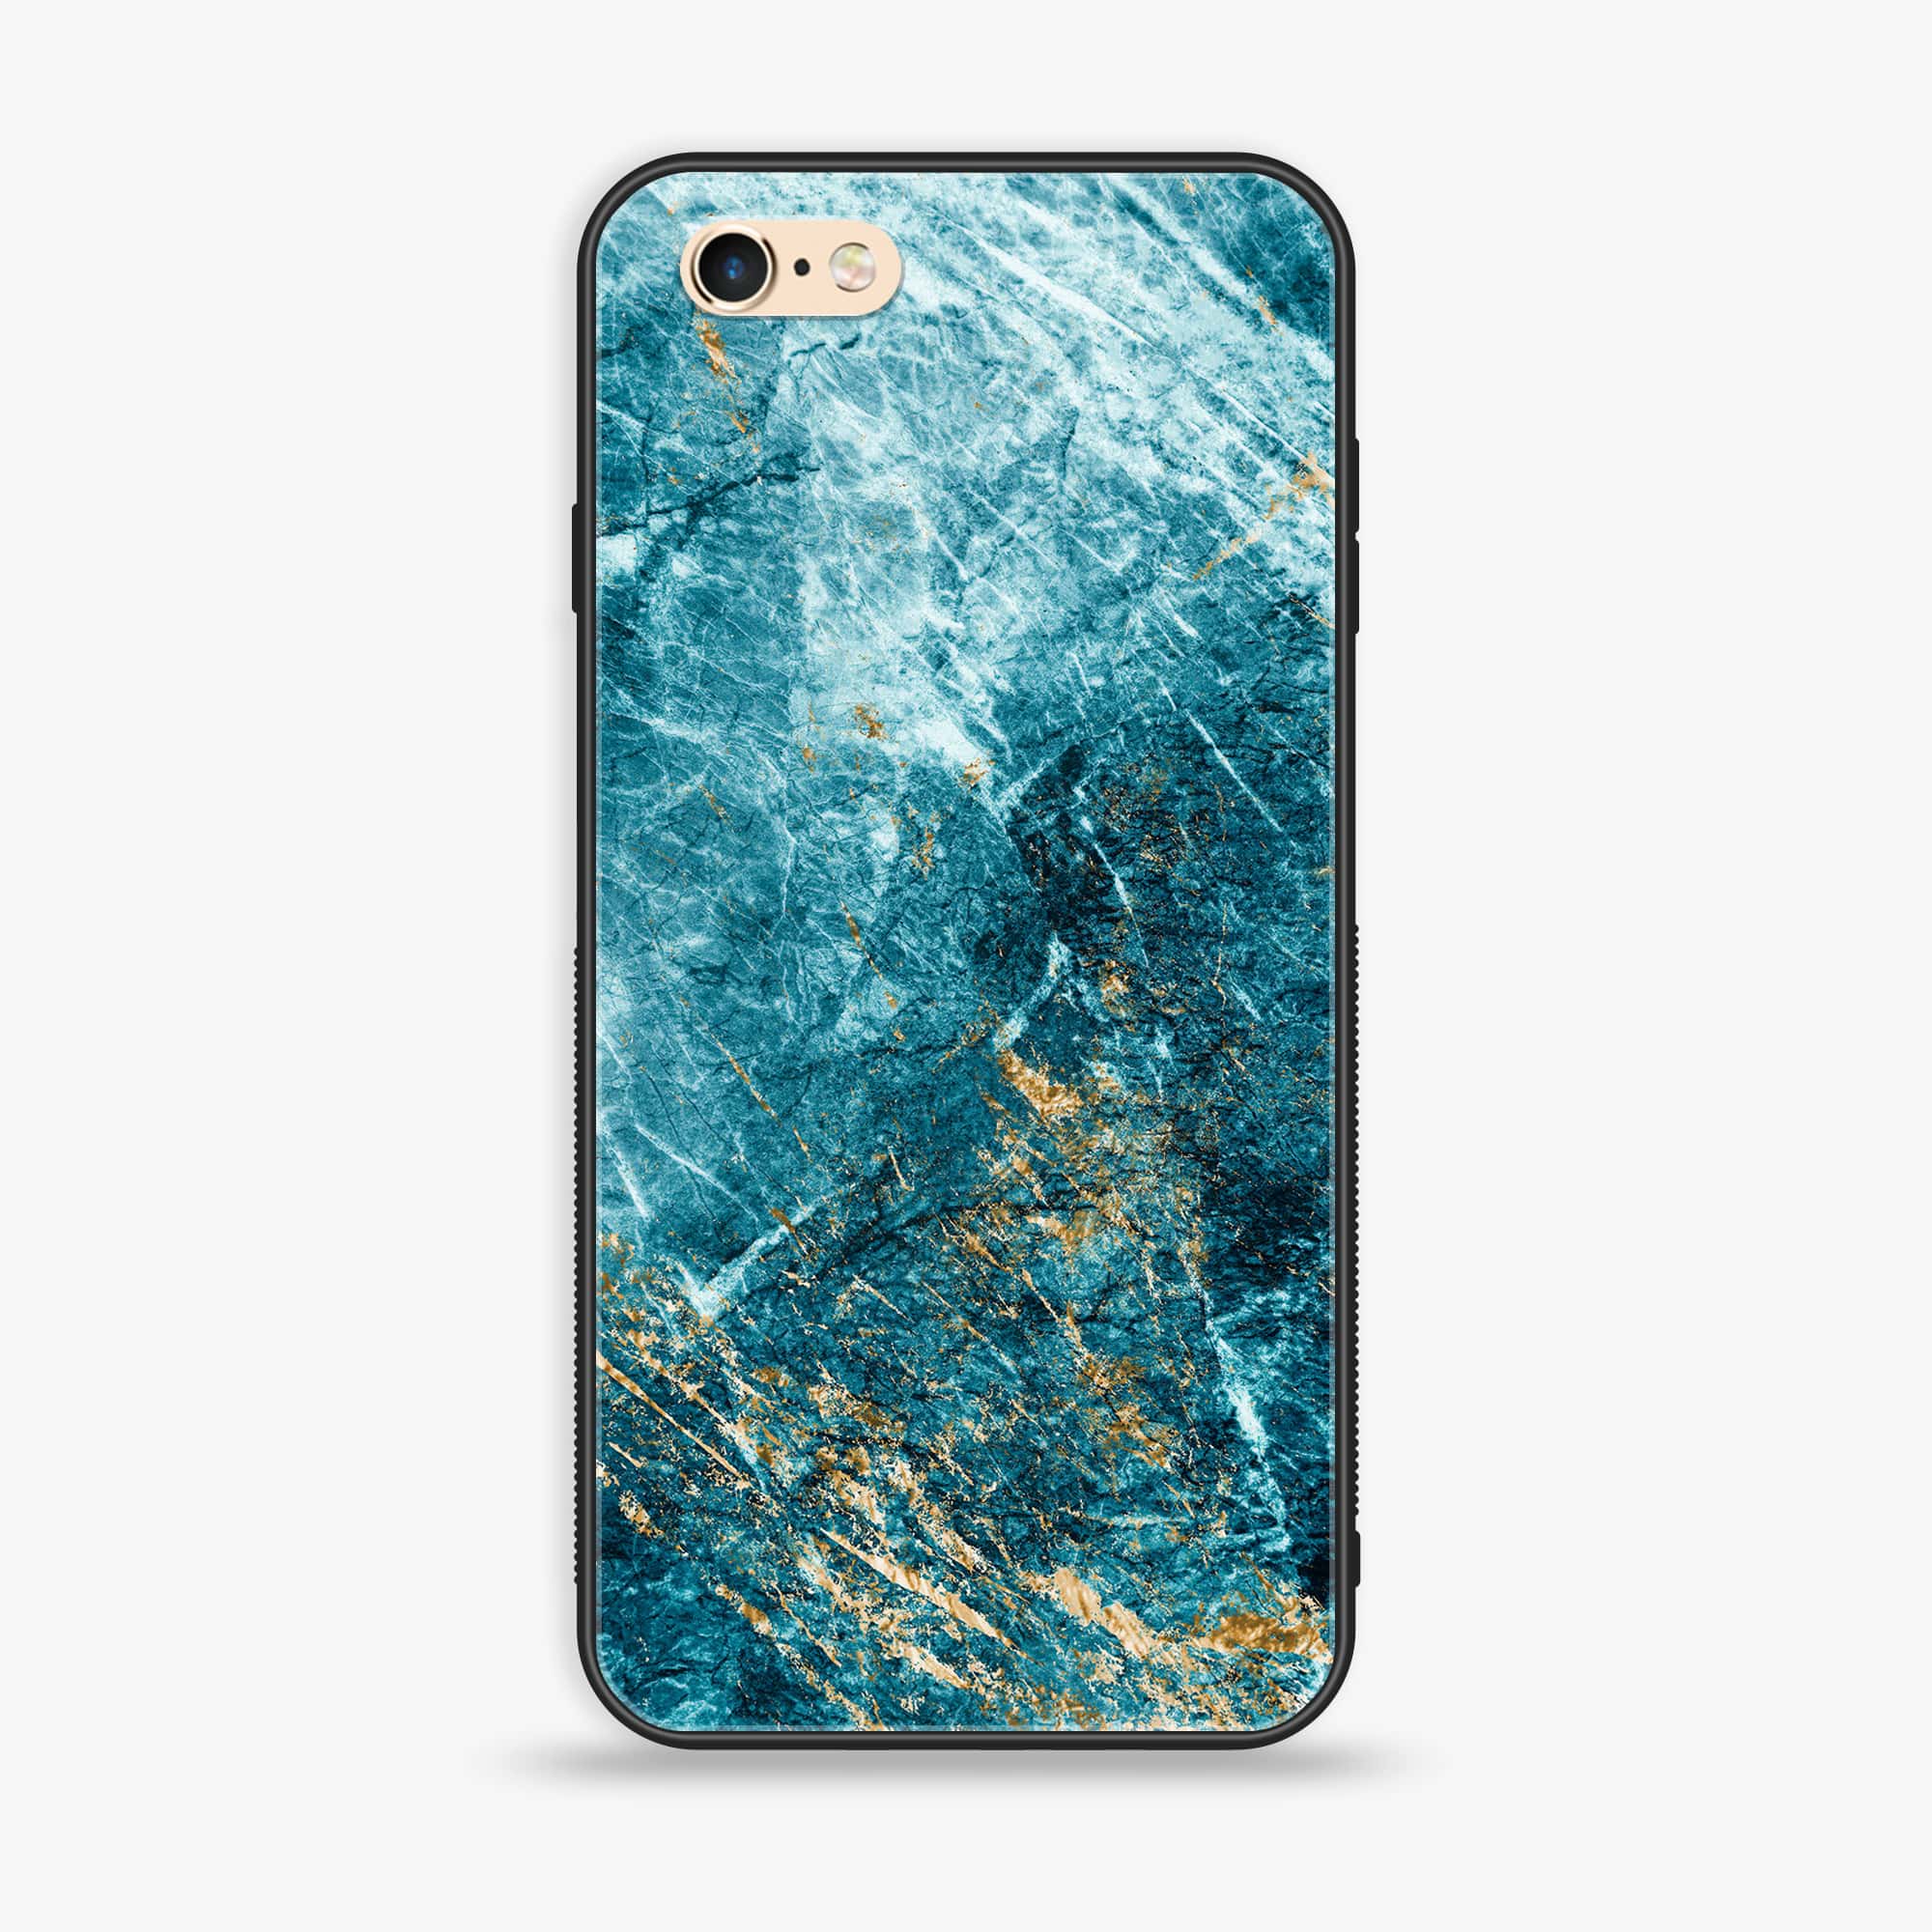 iPhone 6 - Blue Marble Series V 2.0 - Premium Printed Glass soft Bumper shock Proof Case